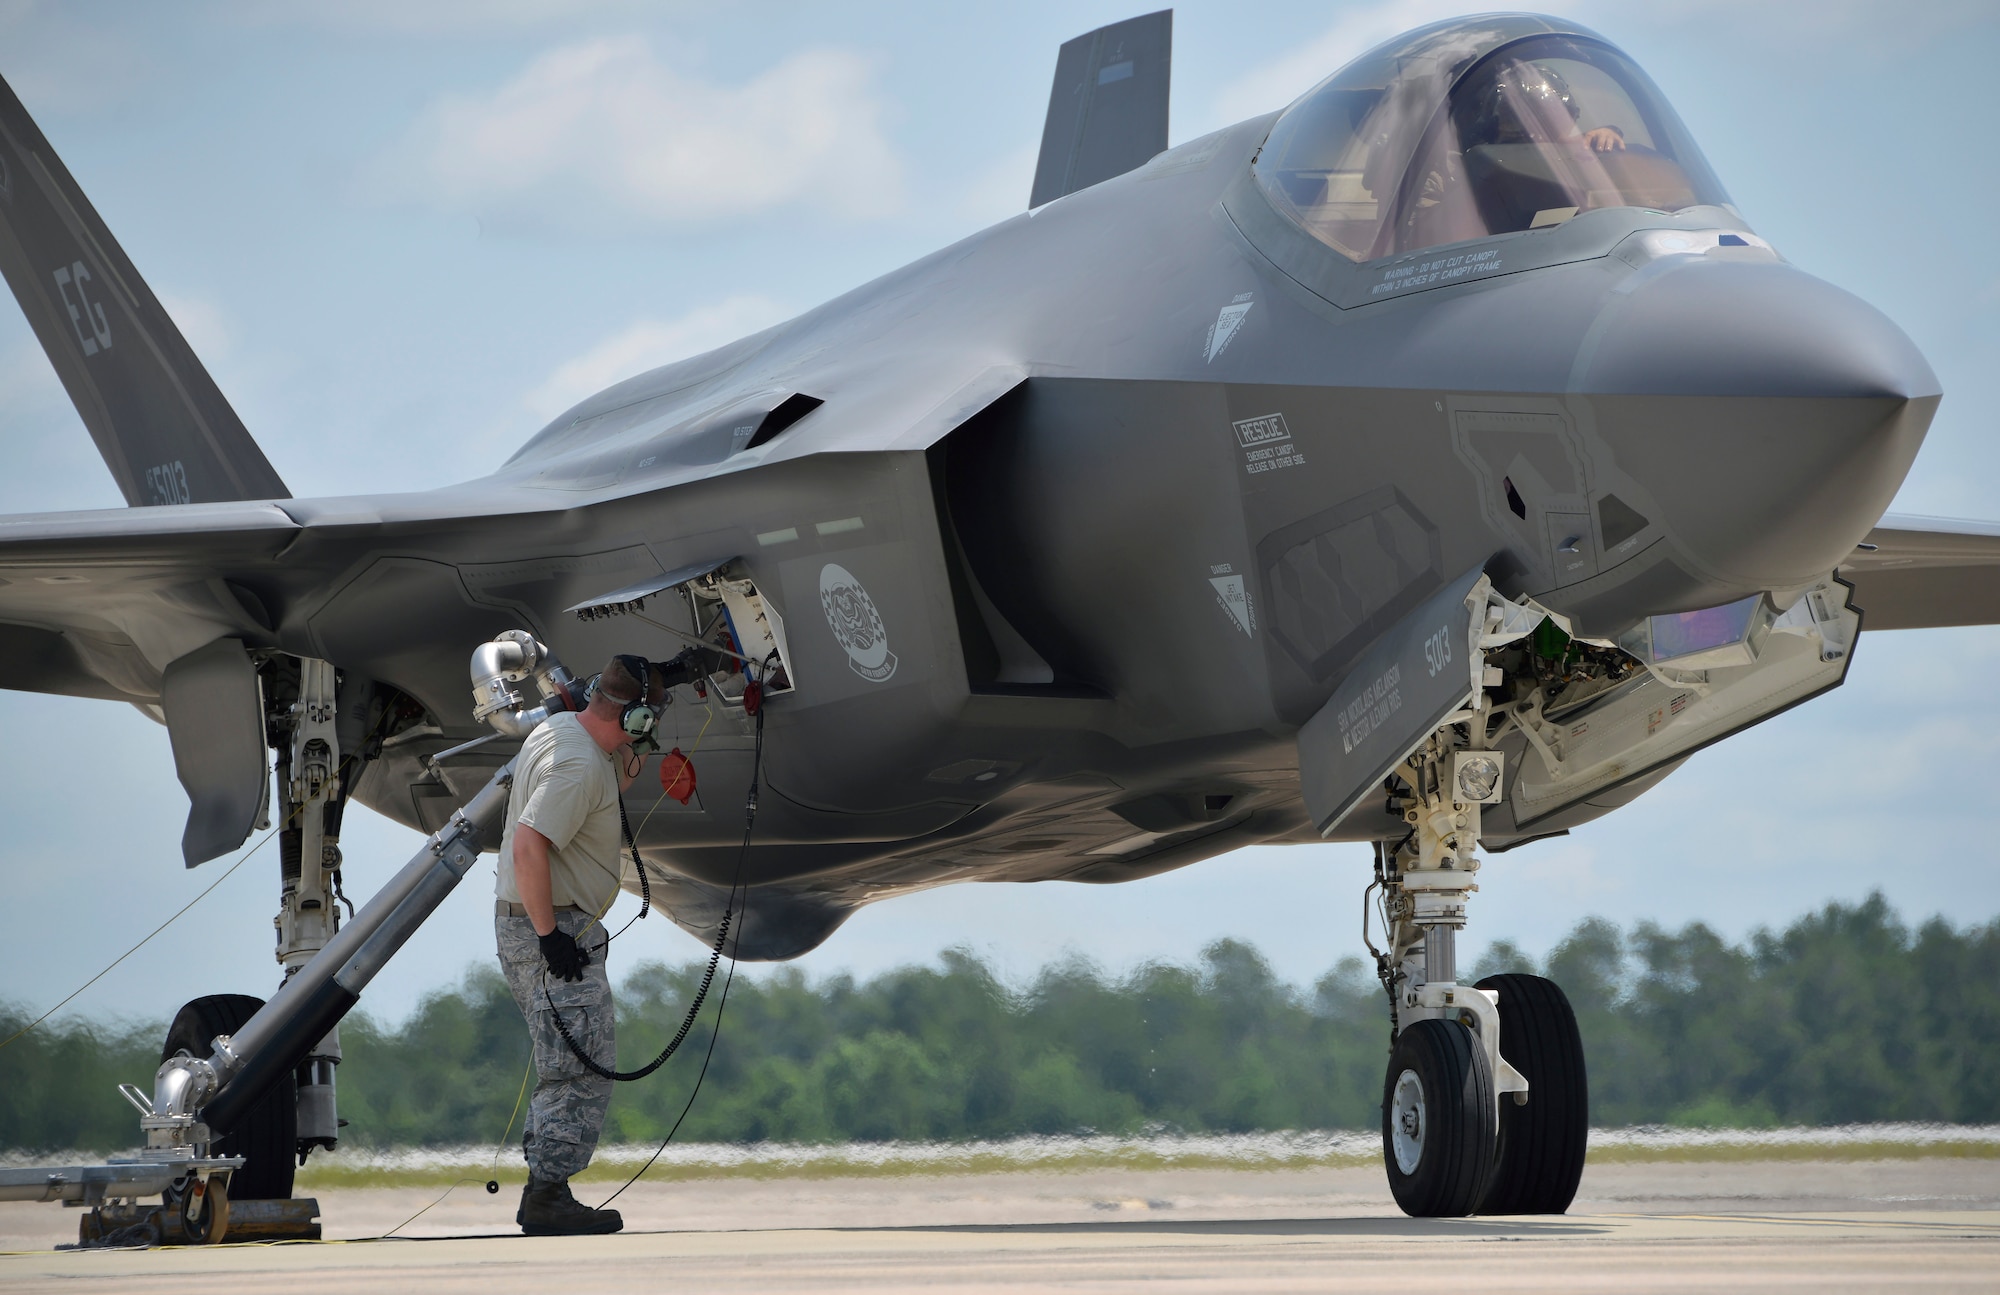 Senior Airman Max Todd, 33rd Aircraft Maintenance Squadron crew chief, performs a hot pit refuel on an F-35A Lightning II at Eglin Air Force Base, Fla., May 13, 2016. This type of aircraft refueling is done while the engine is running to get jets back in the air more quickly and is a common practice during wartime. Crew chiefs from the 33rd Fighter Wing perform this type of refueling at least once a week to keep maintenance Airmen up-to-date on training and qualifications. (U.S. Air Force photo/Senior Airman Andrea Posey)